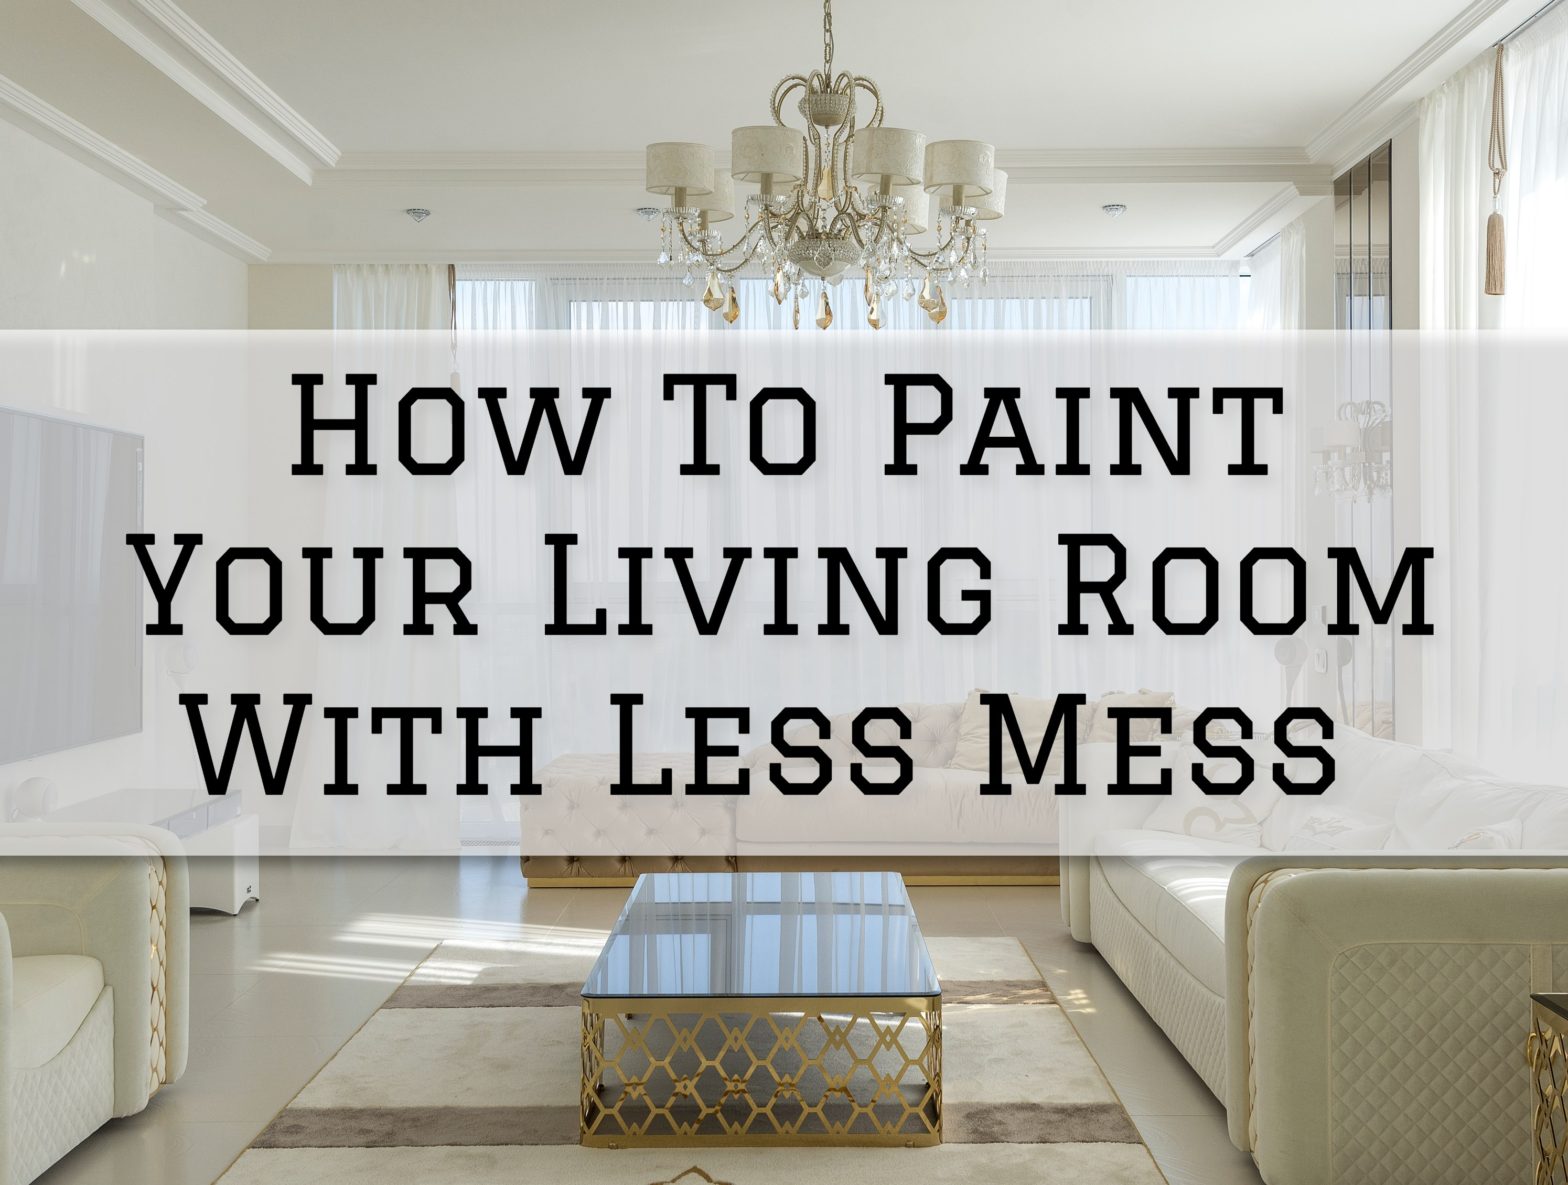 2023-06-01 Painting and Wallpapering Hamilton Ontario How To Paint Your Living Room With Less Mess